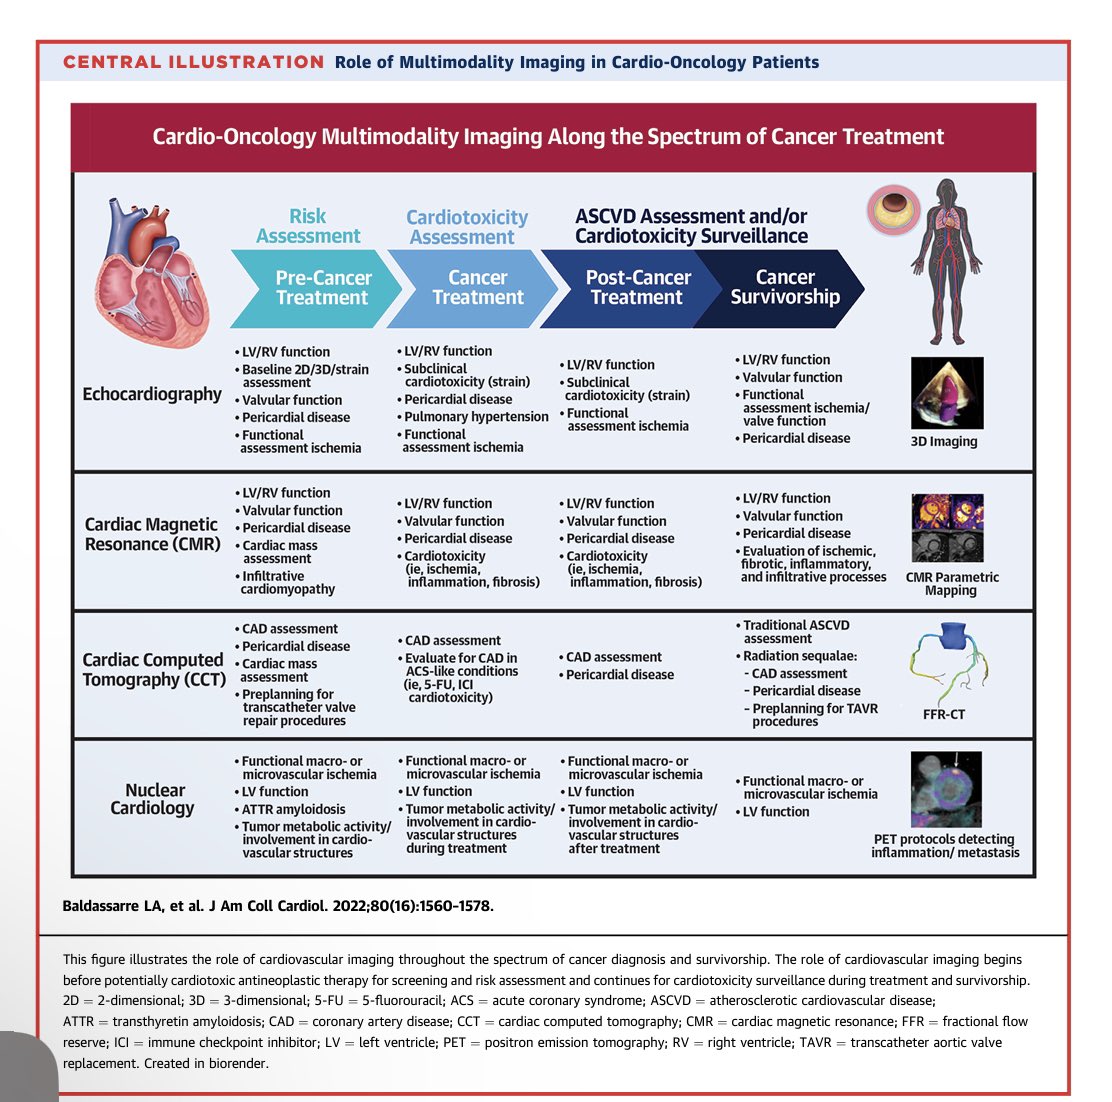 Join us on Thursday at 7 pm ET for the #ACCImaging #ACCCardioOnc councils sponsored webinar: Advances in Multimodality Imaging in Cardio-Oncology Patients Register here👉🏼 acc.org/Education-and-… Paper here 👉🏼 sciencedirect.com/science/articl…